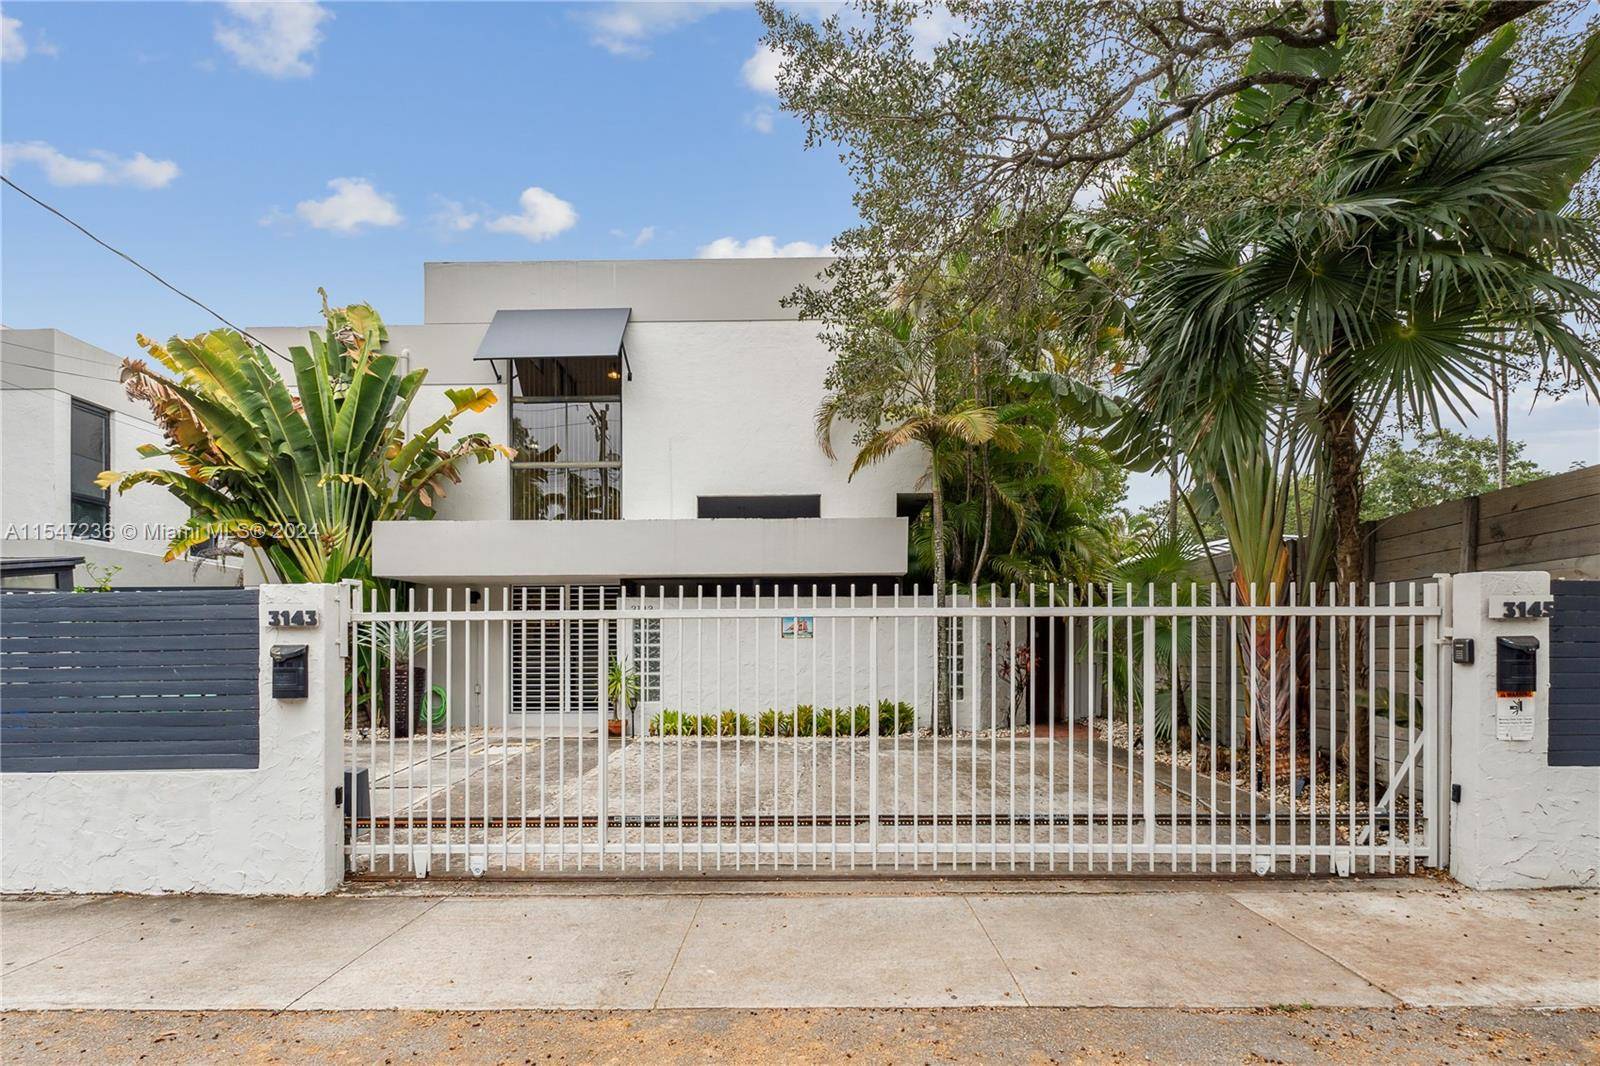 Welcome to Paradise ! A lush garden entrance sets the special ambiance for this spectacular furnished corner townhome with extra large private tropical garden bricked patio.